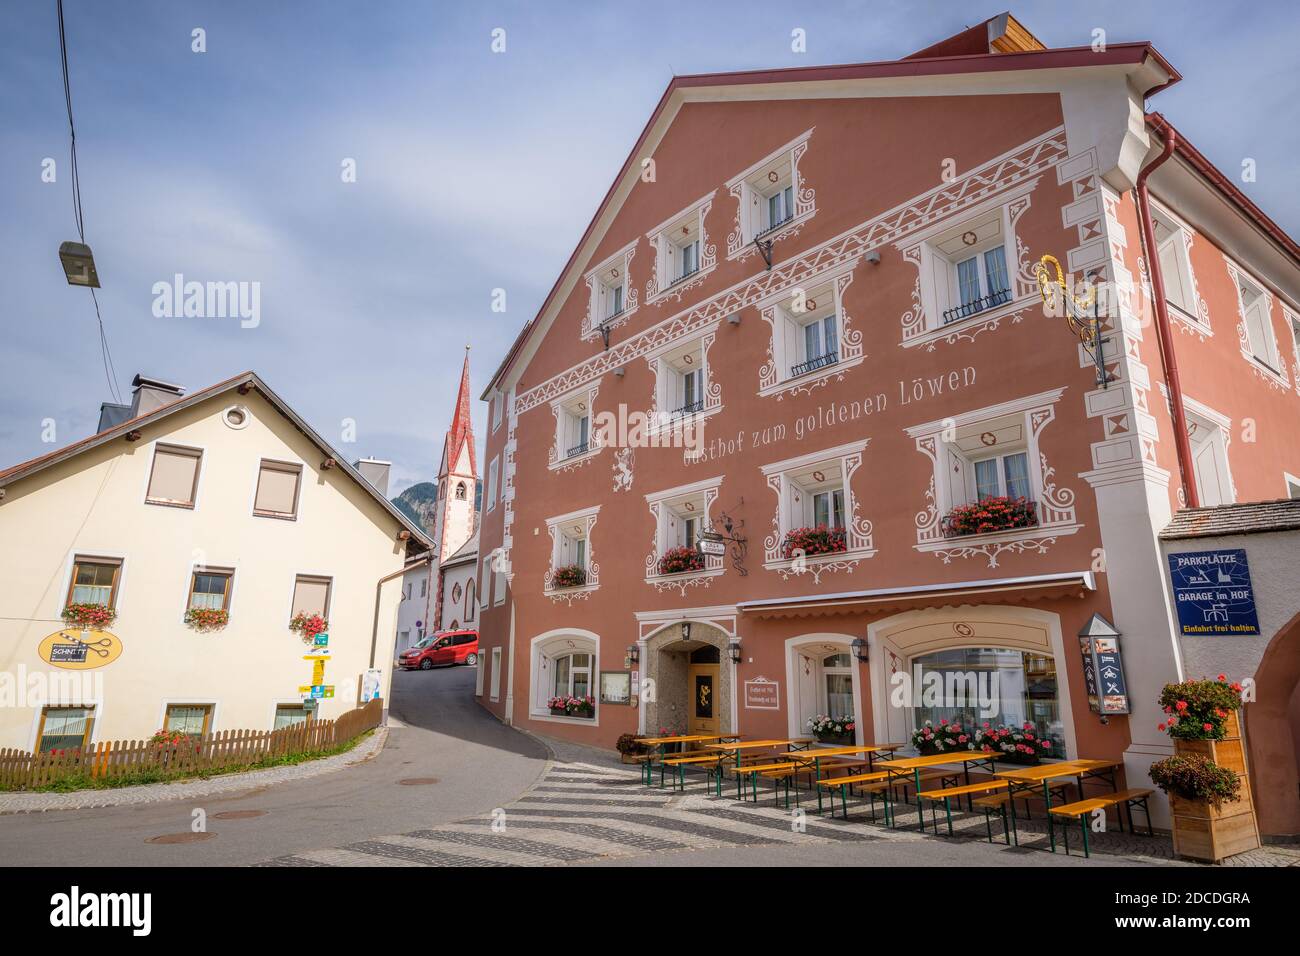 Nauders, Austria - September 22, 2019: The center of the small Austrian village of Nauders features a lot of restaurants, bars and sports shops Stock Photo